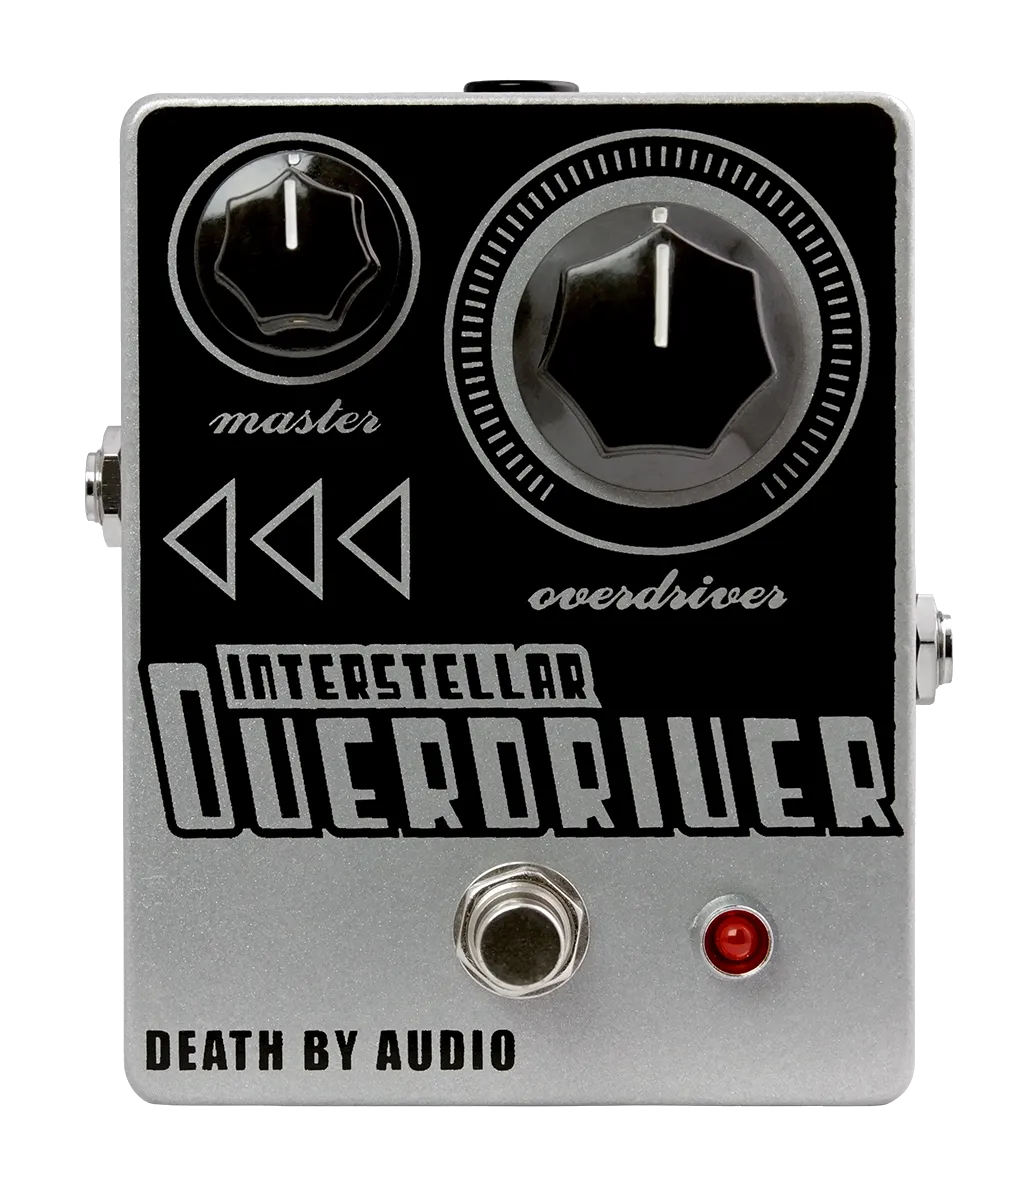 Interstellar Overdriver Guitar Pedal By Death By Audio